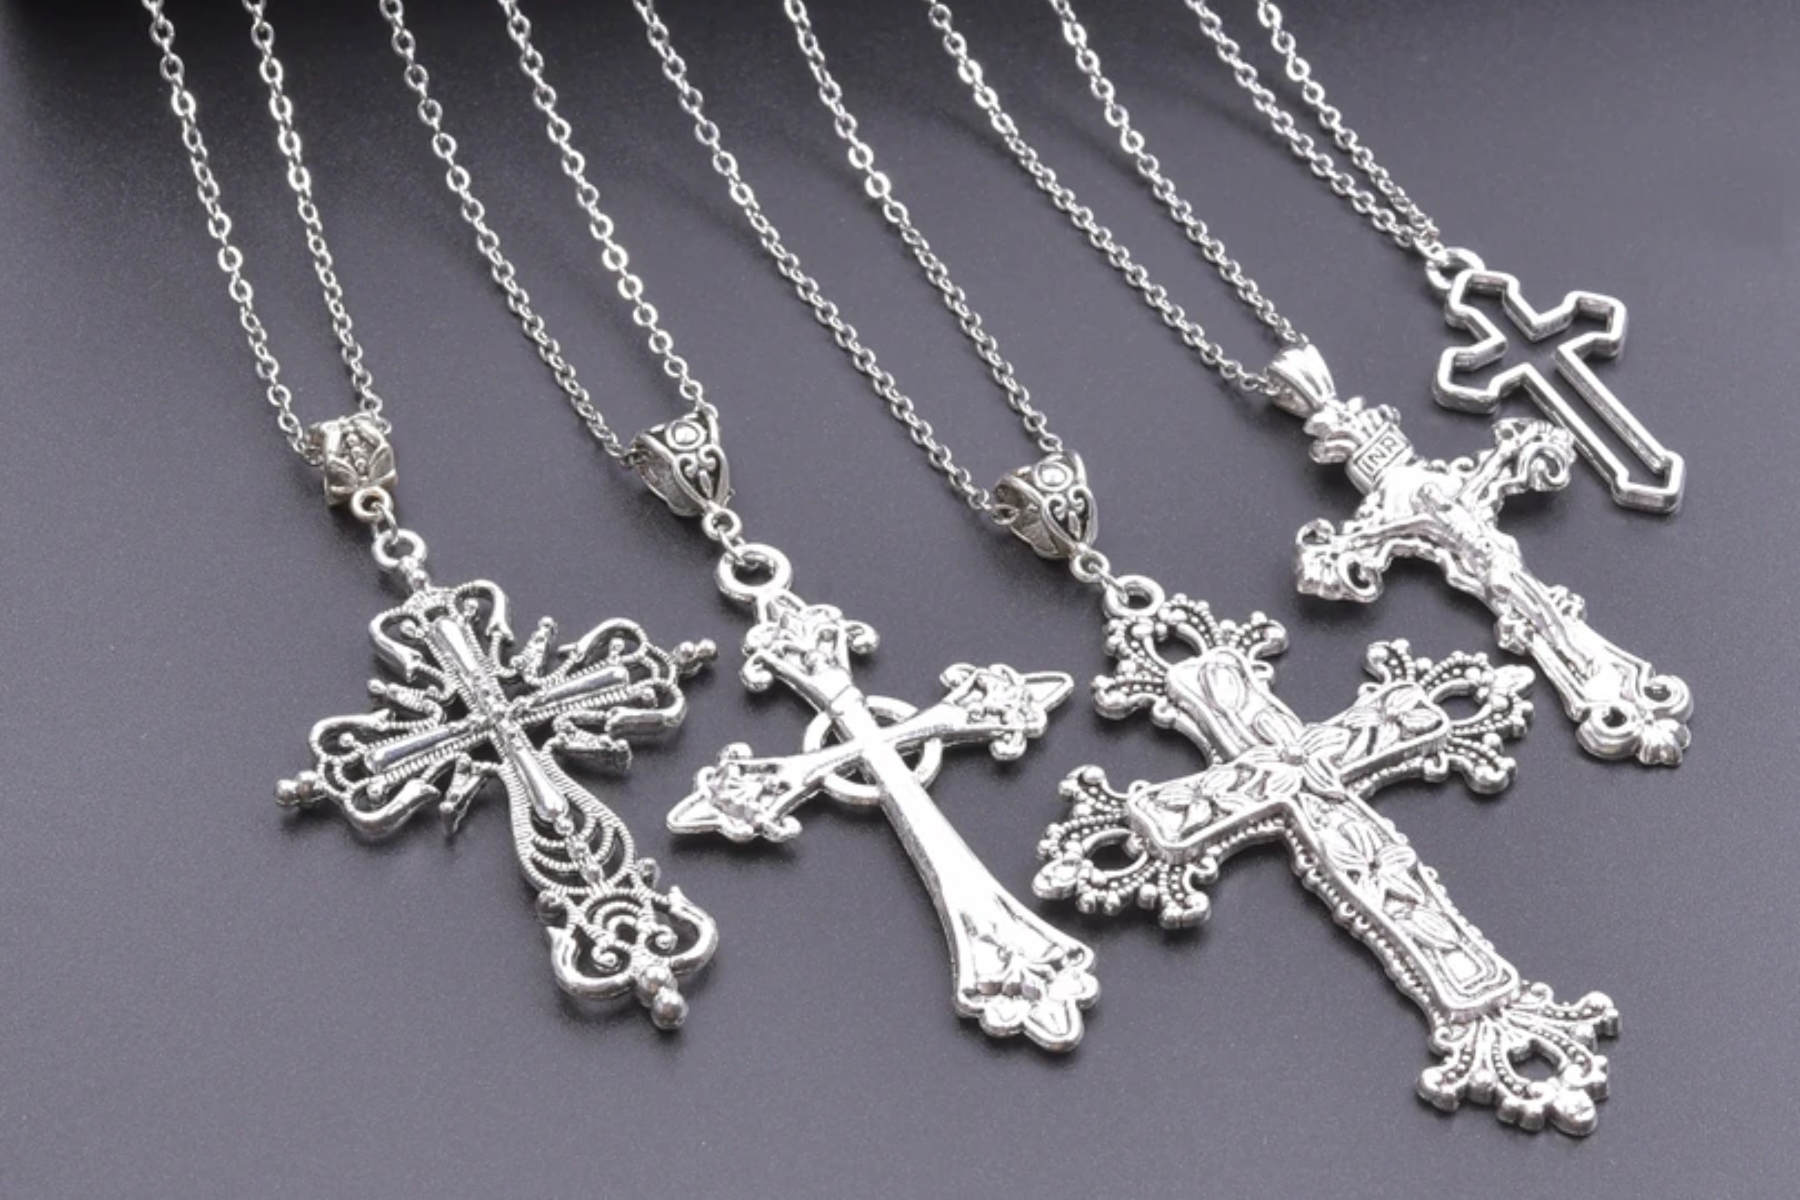 Five different types of cross religious pendant necklaces